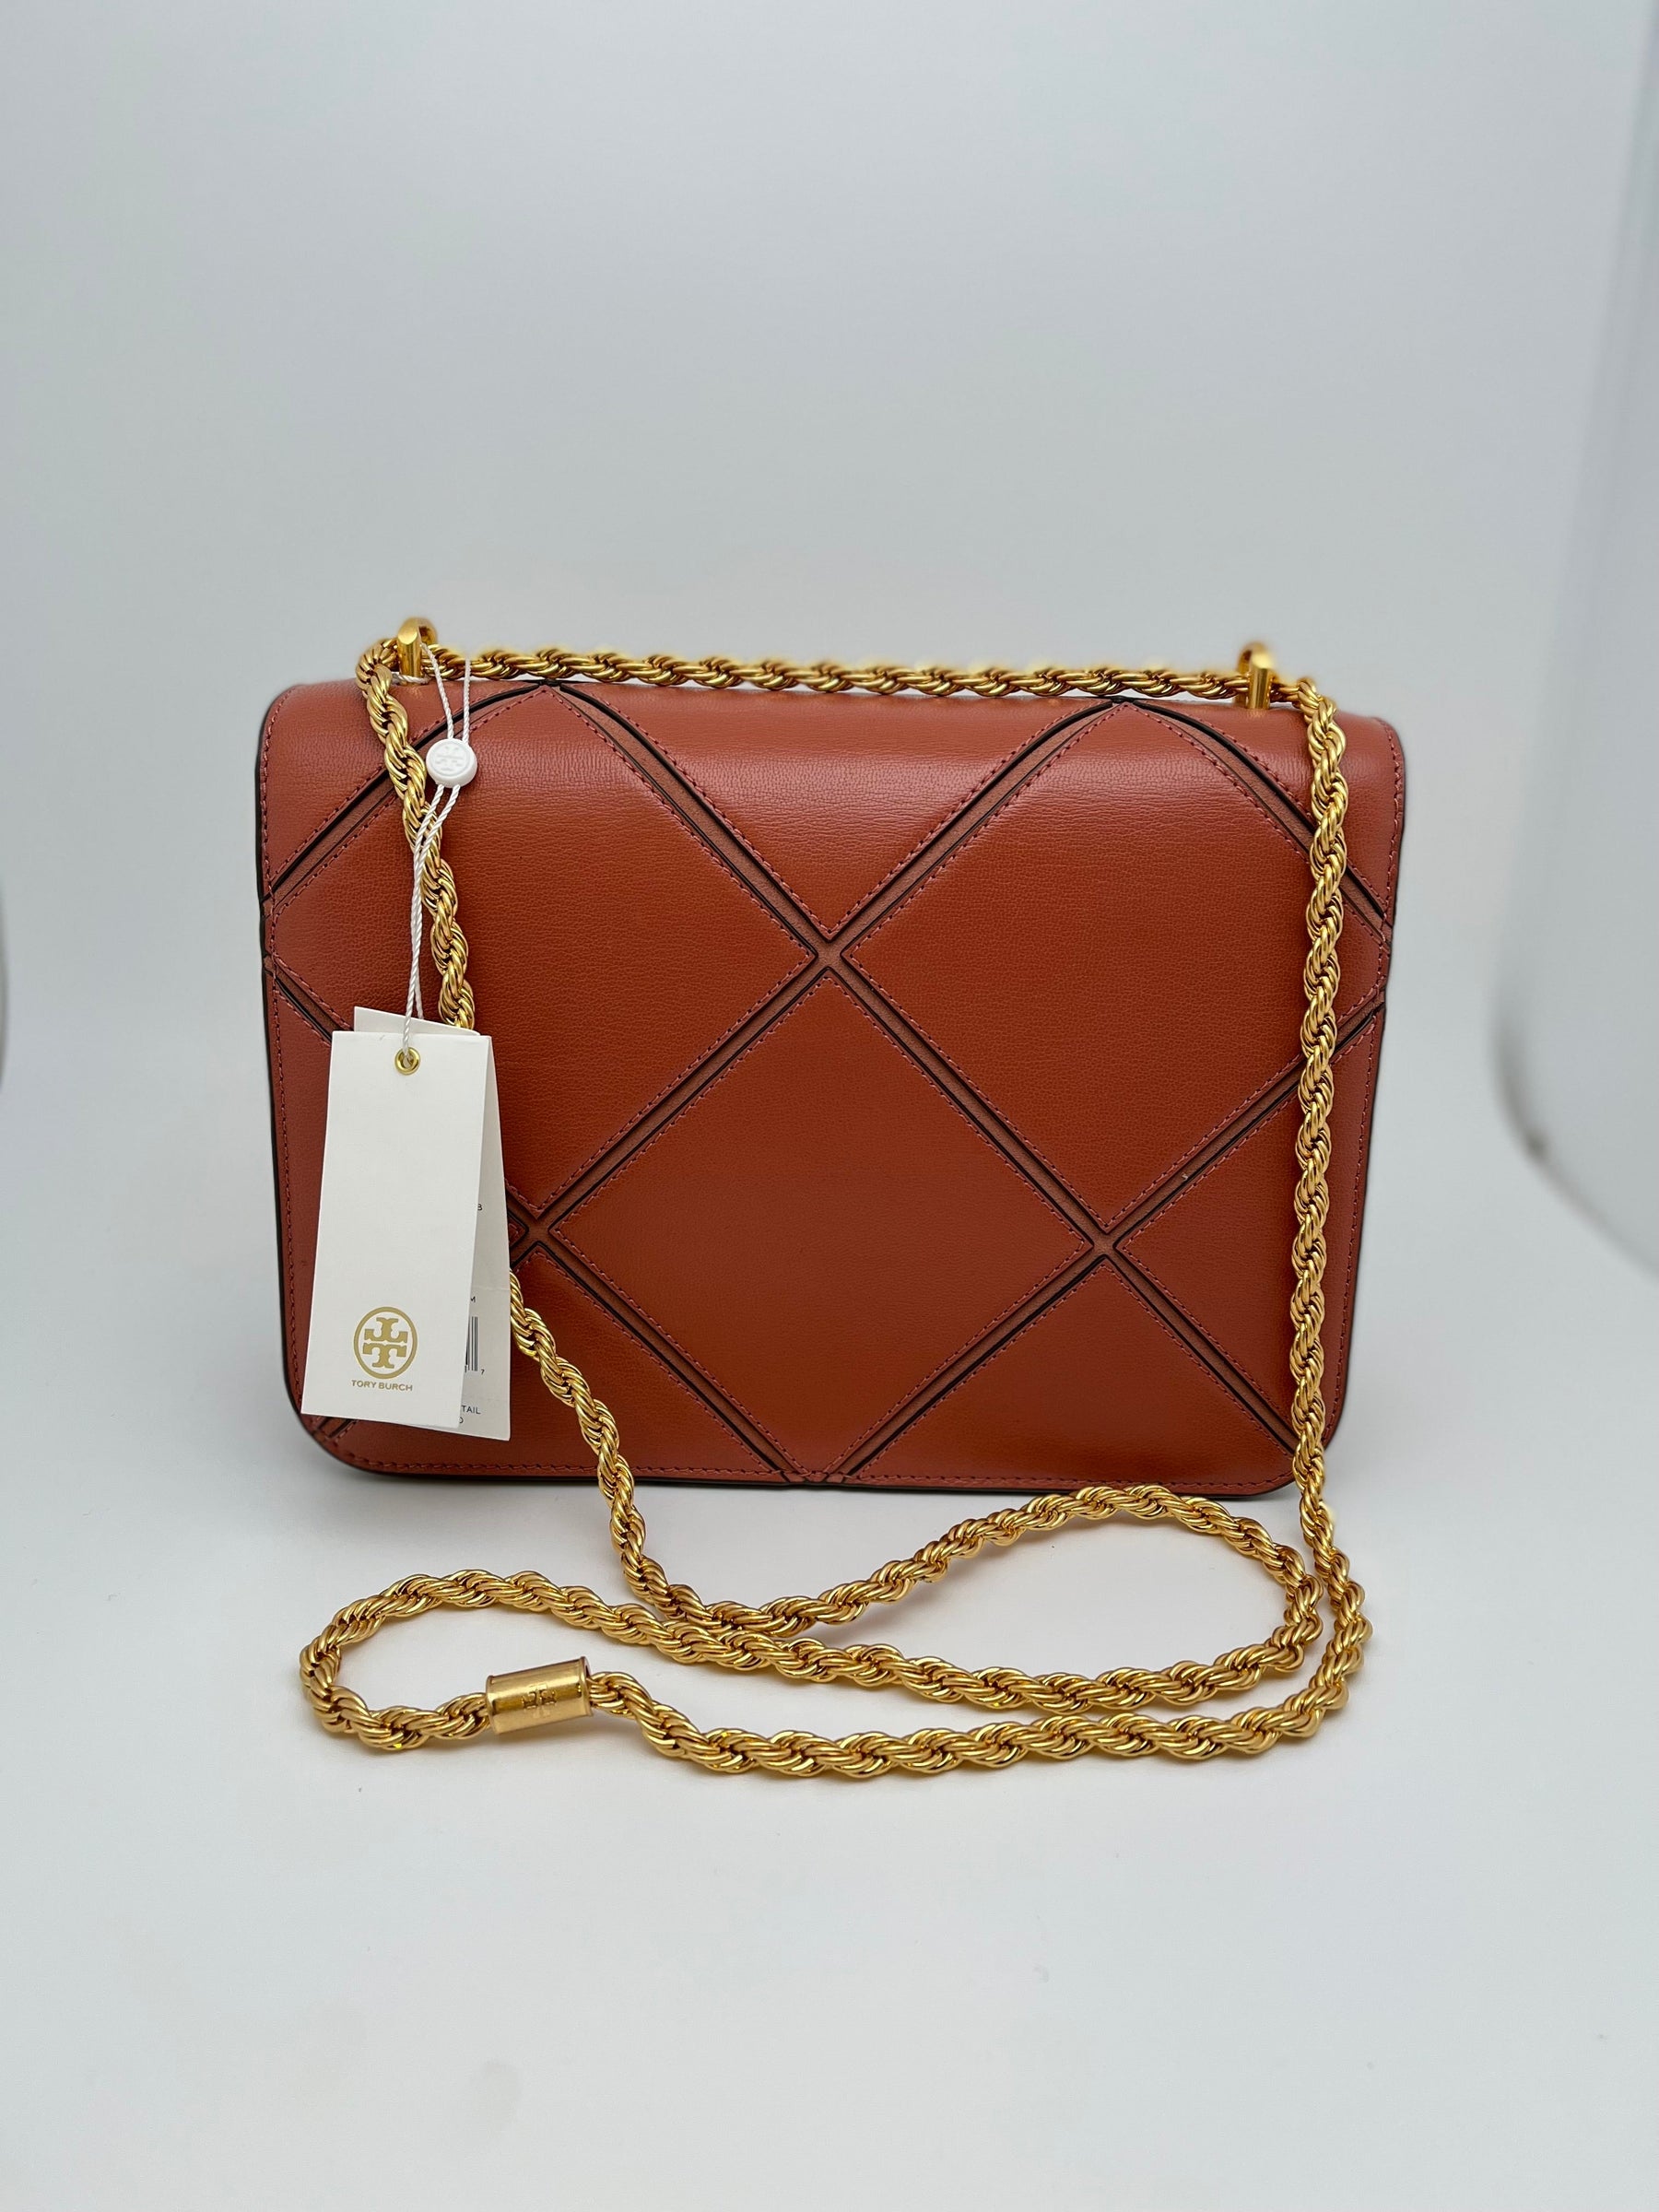 Tory Burch Eleanor Diamond Shoulder Bag with leather and gold toned hardware. Interior pockets and snap closure. New with tags